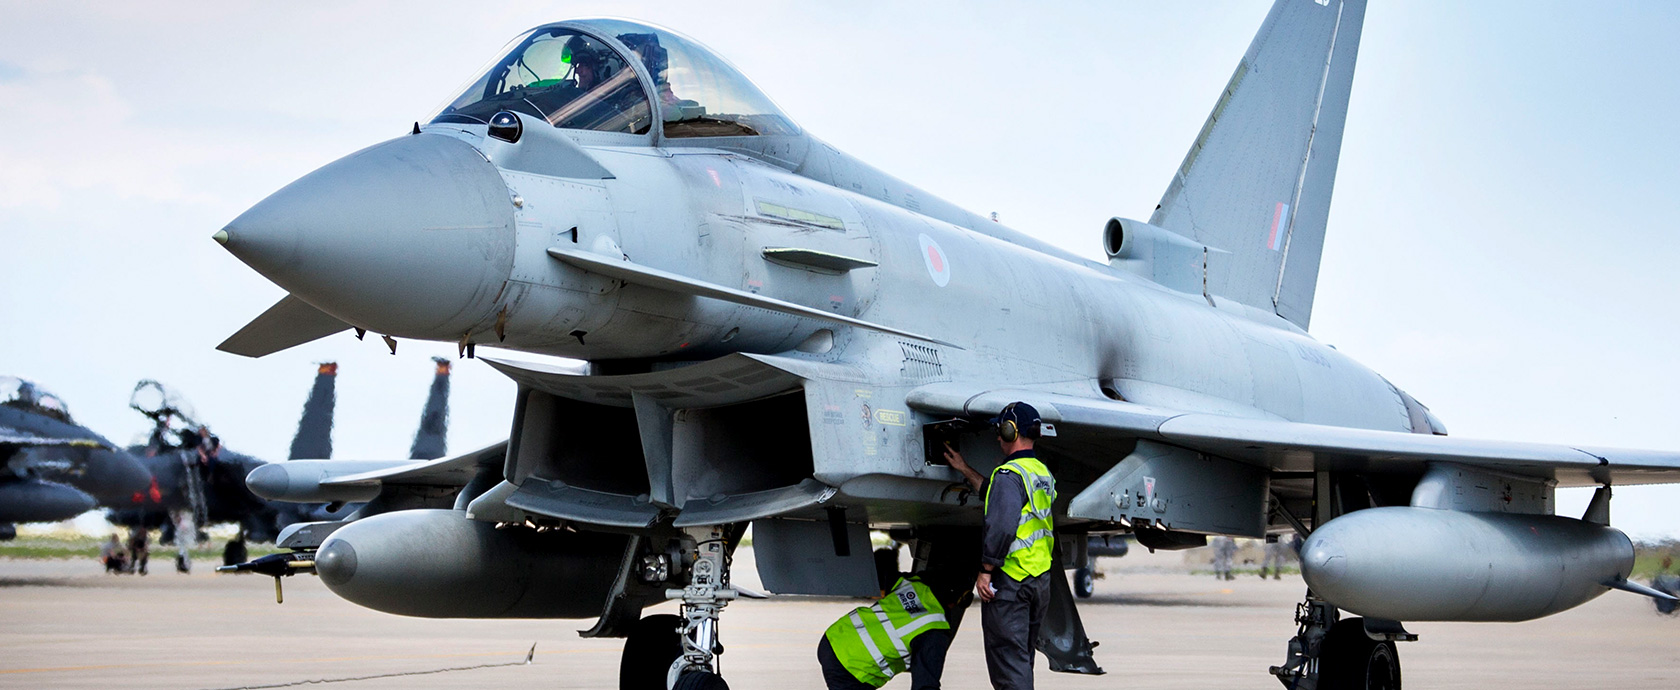 Image shows RAF Typhoon on the airfield with RAF aviator.